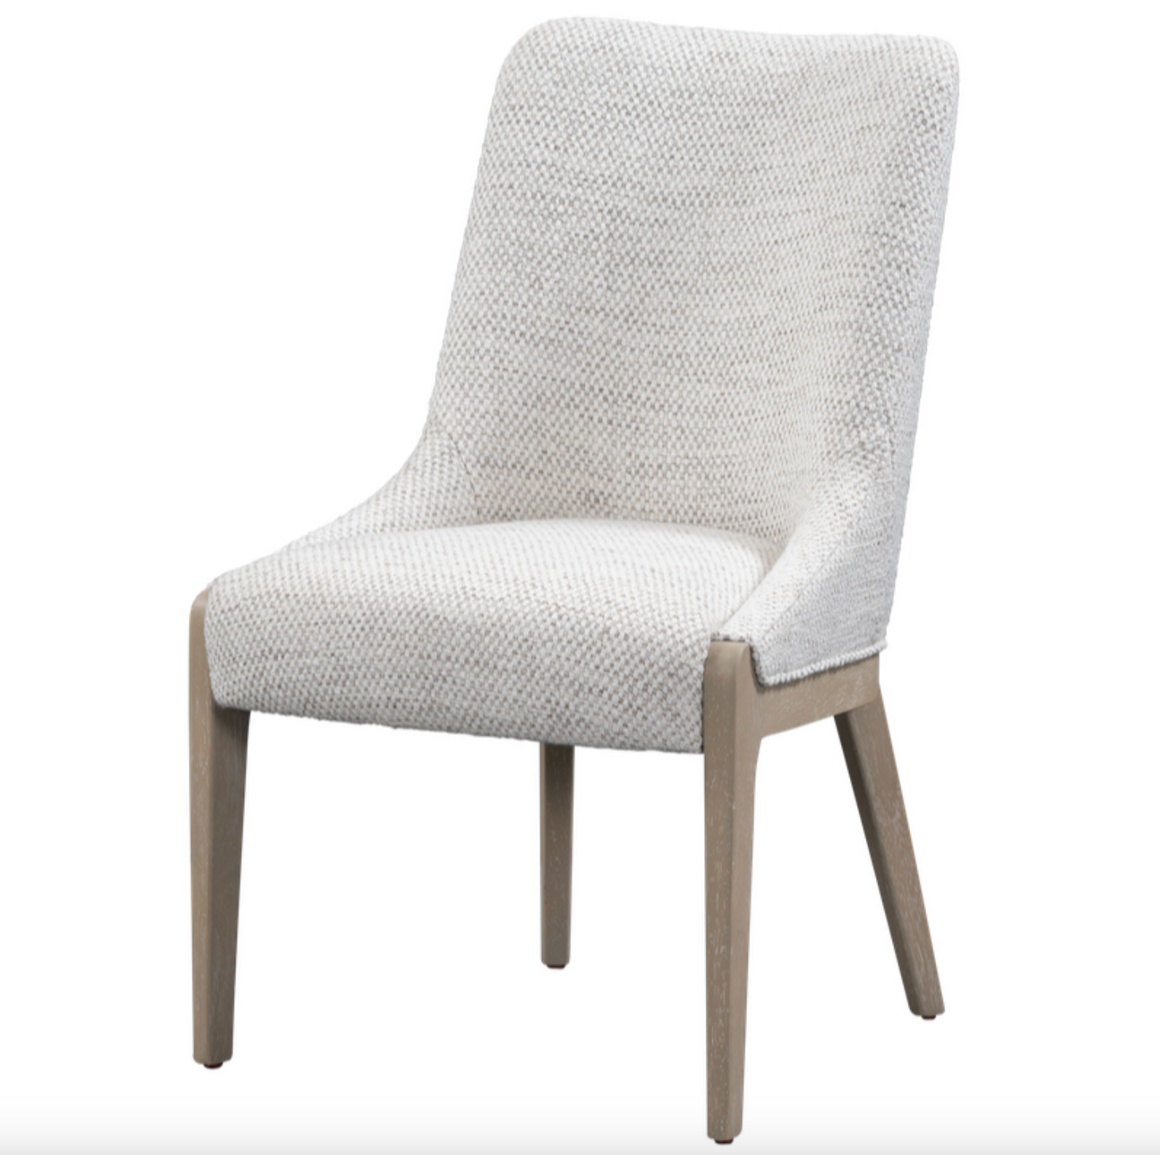 Astraea Dining Chair - Performance Crushed Cream